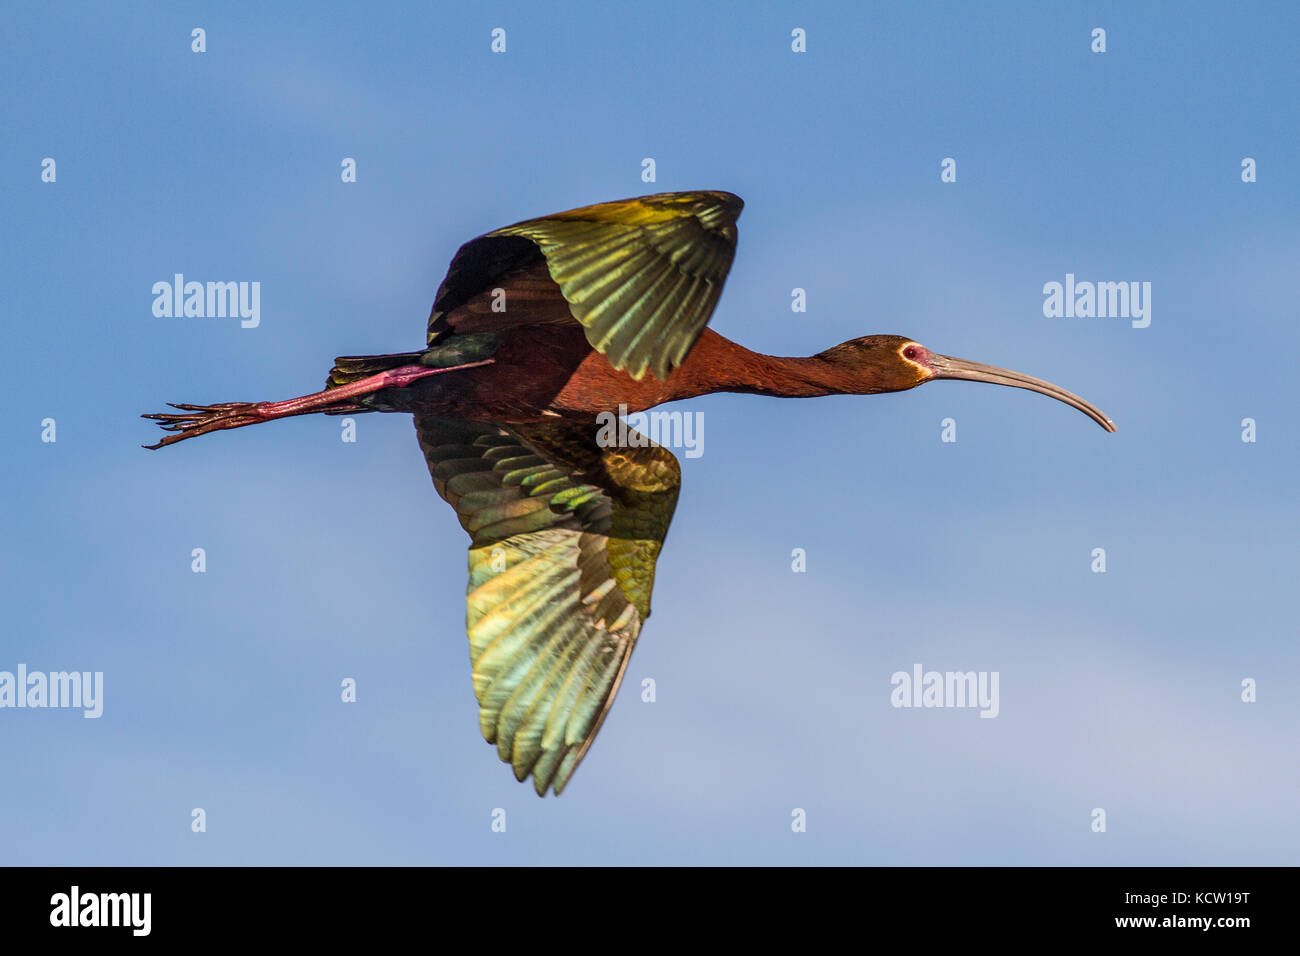 White-faced Ibis (Plegadis chihi) Caught in flight, showing its brillant colors, red eye and curved beak. Frank Lake, Alberta, Canada Stock Photo